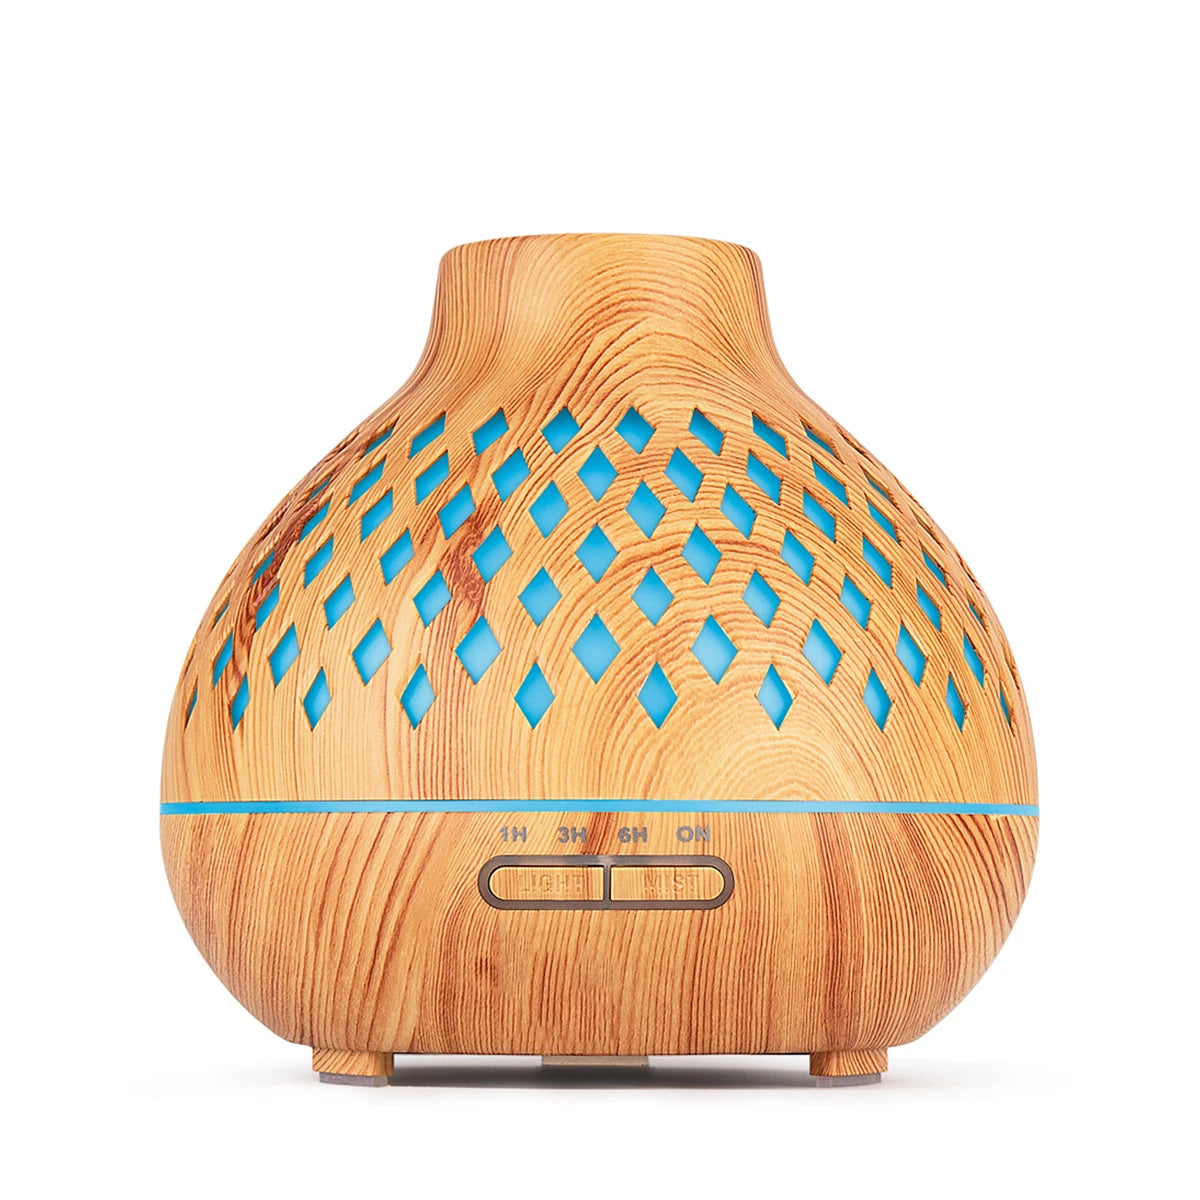 500ML Aromatherapy Essential Oil Diffuser Wood Grain Remote Control Ultrasonic Air Humidifier Cool with 7 Color Lights For Home